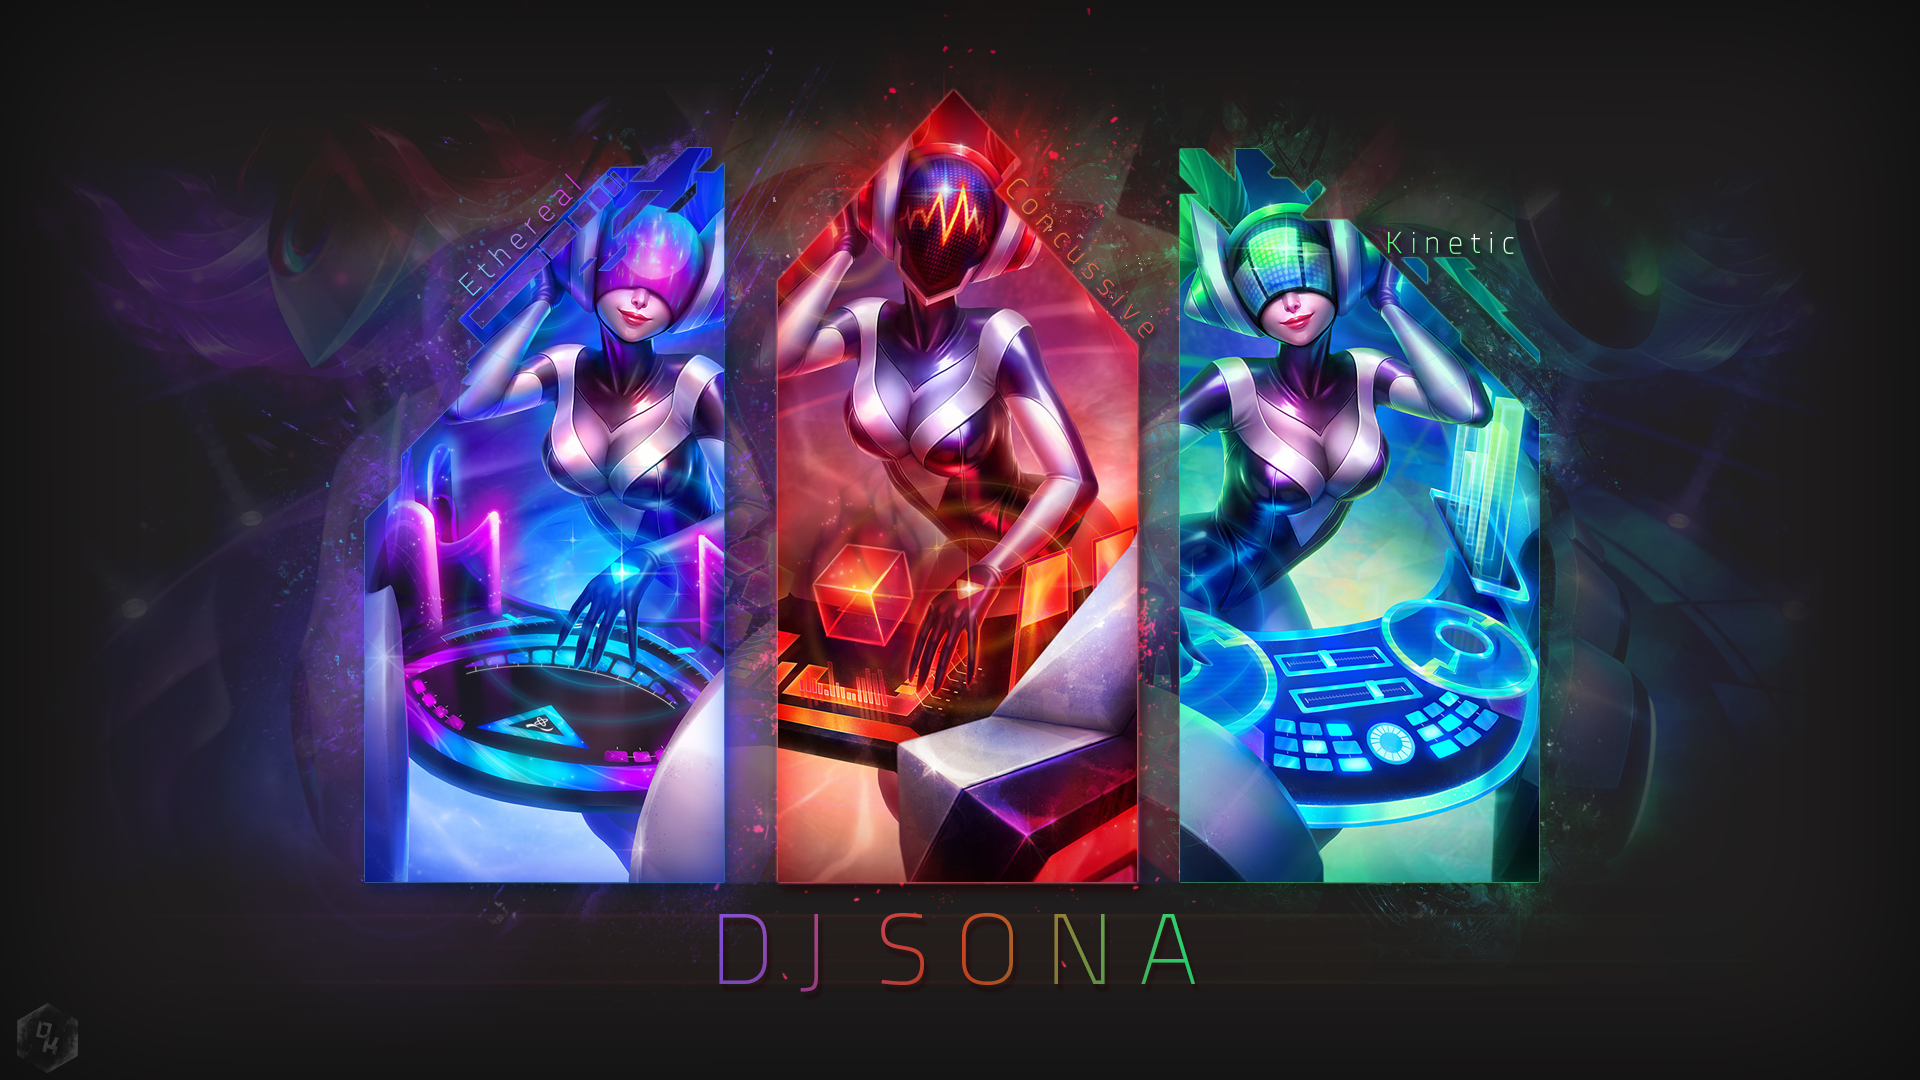 Live wallpaper DJ Sona from League of Legends DOWNLOAD FREE (828182664)